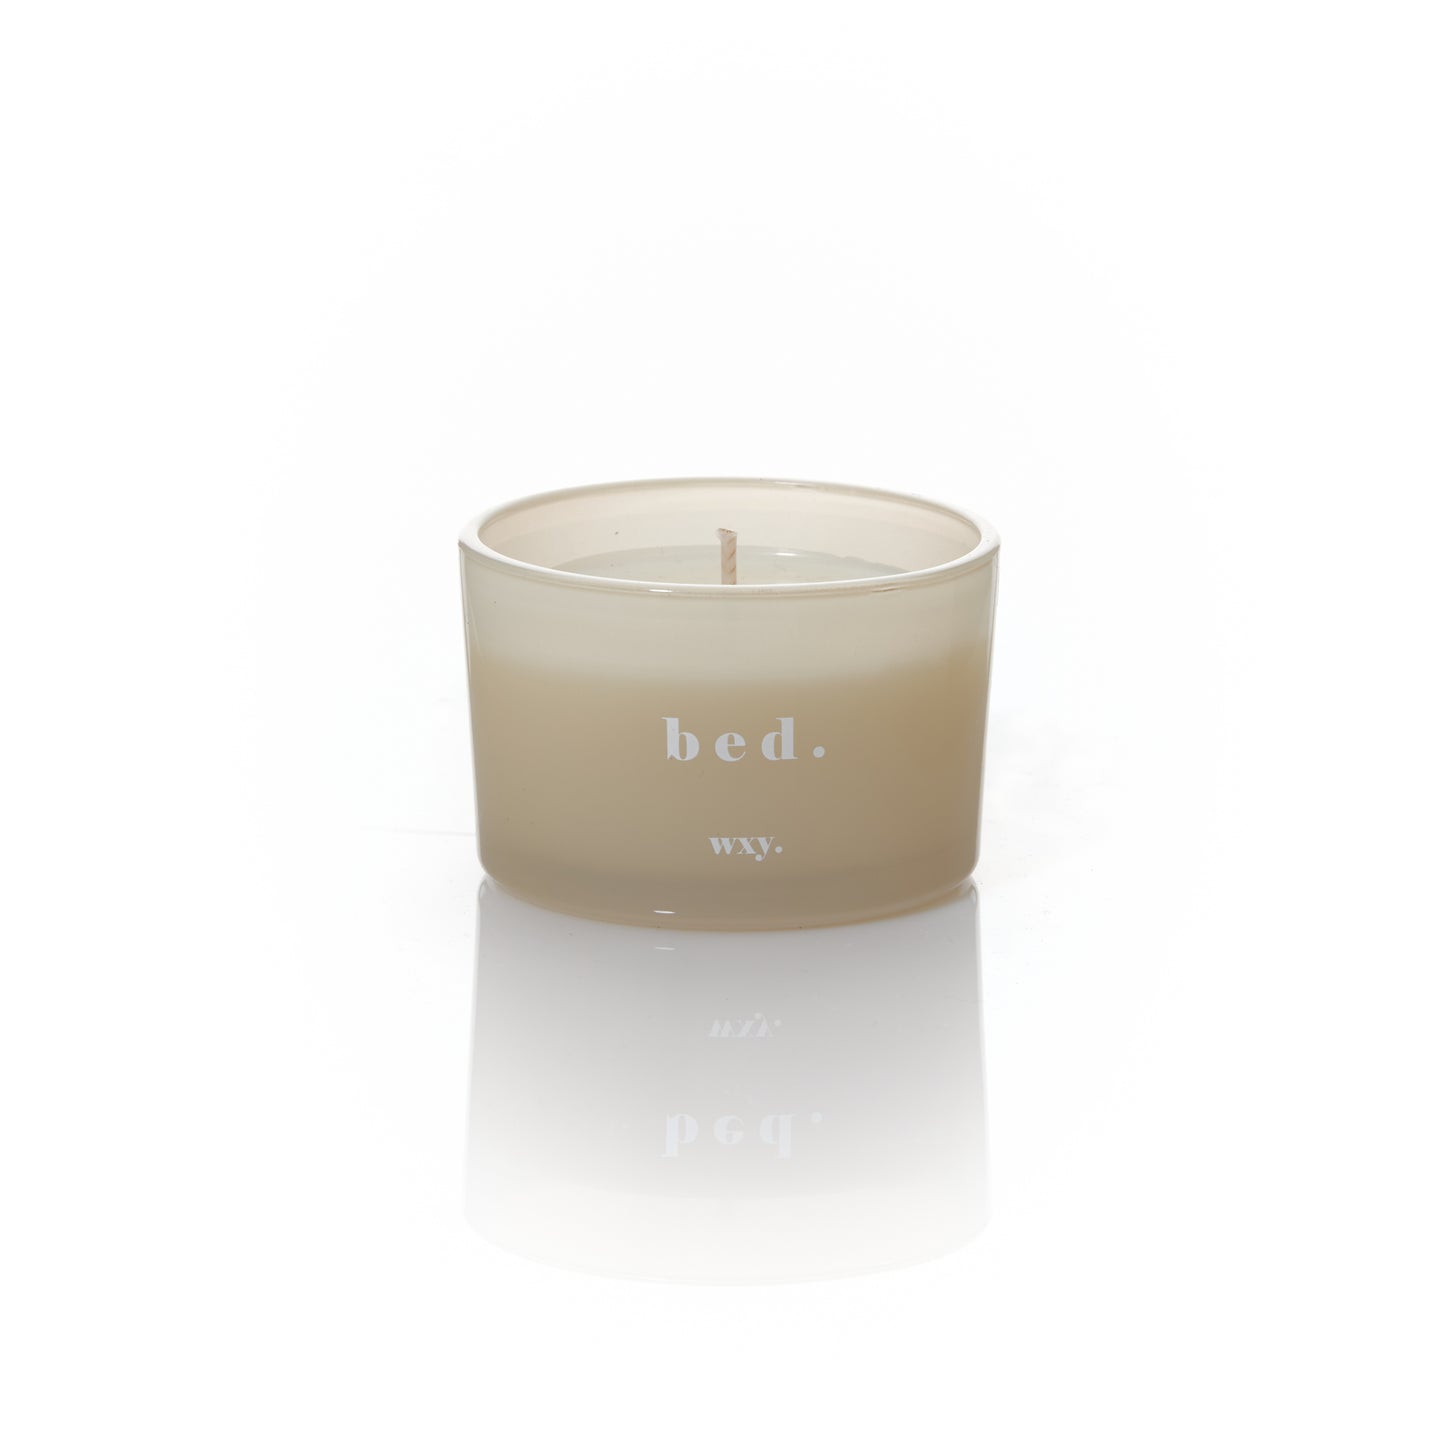 WXY. Bed. Mini Candle